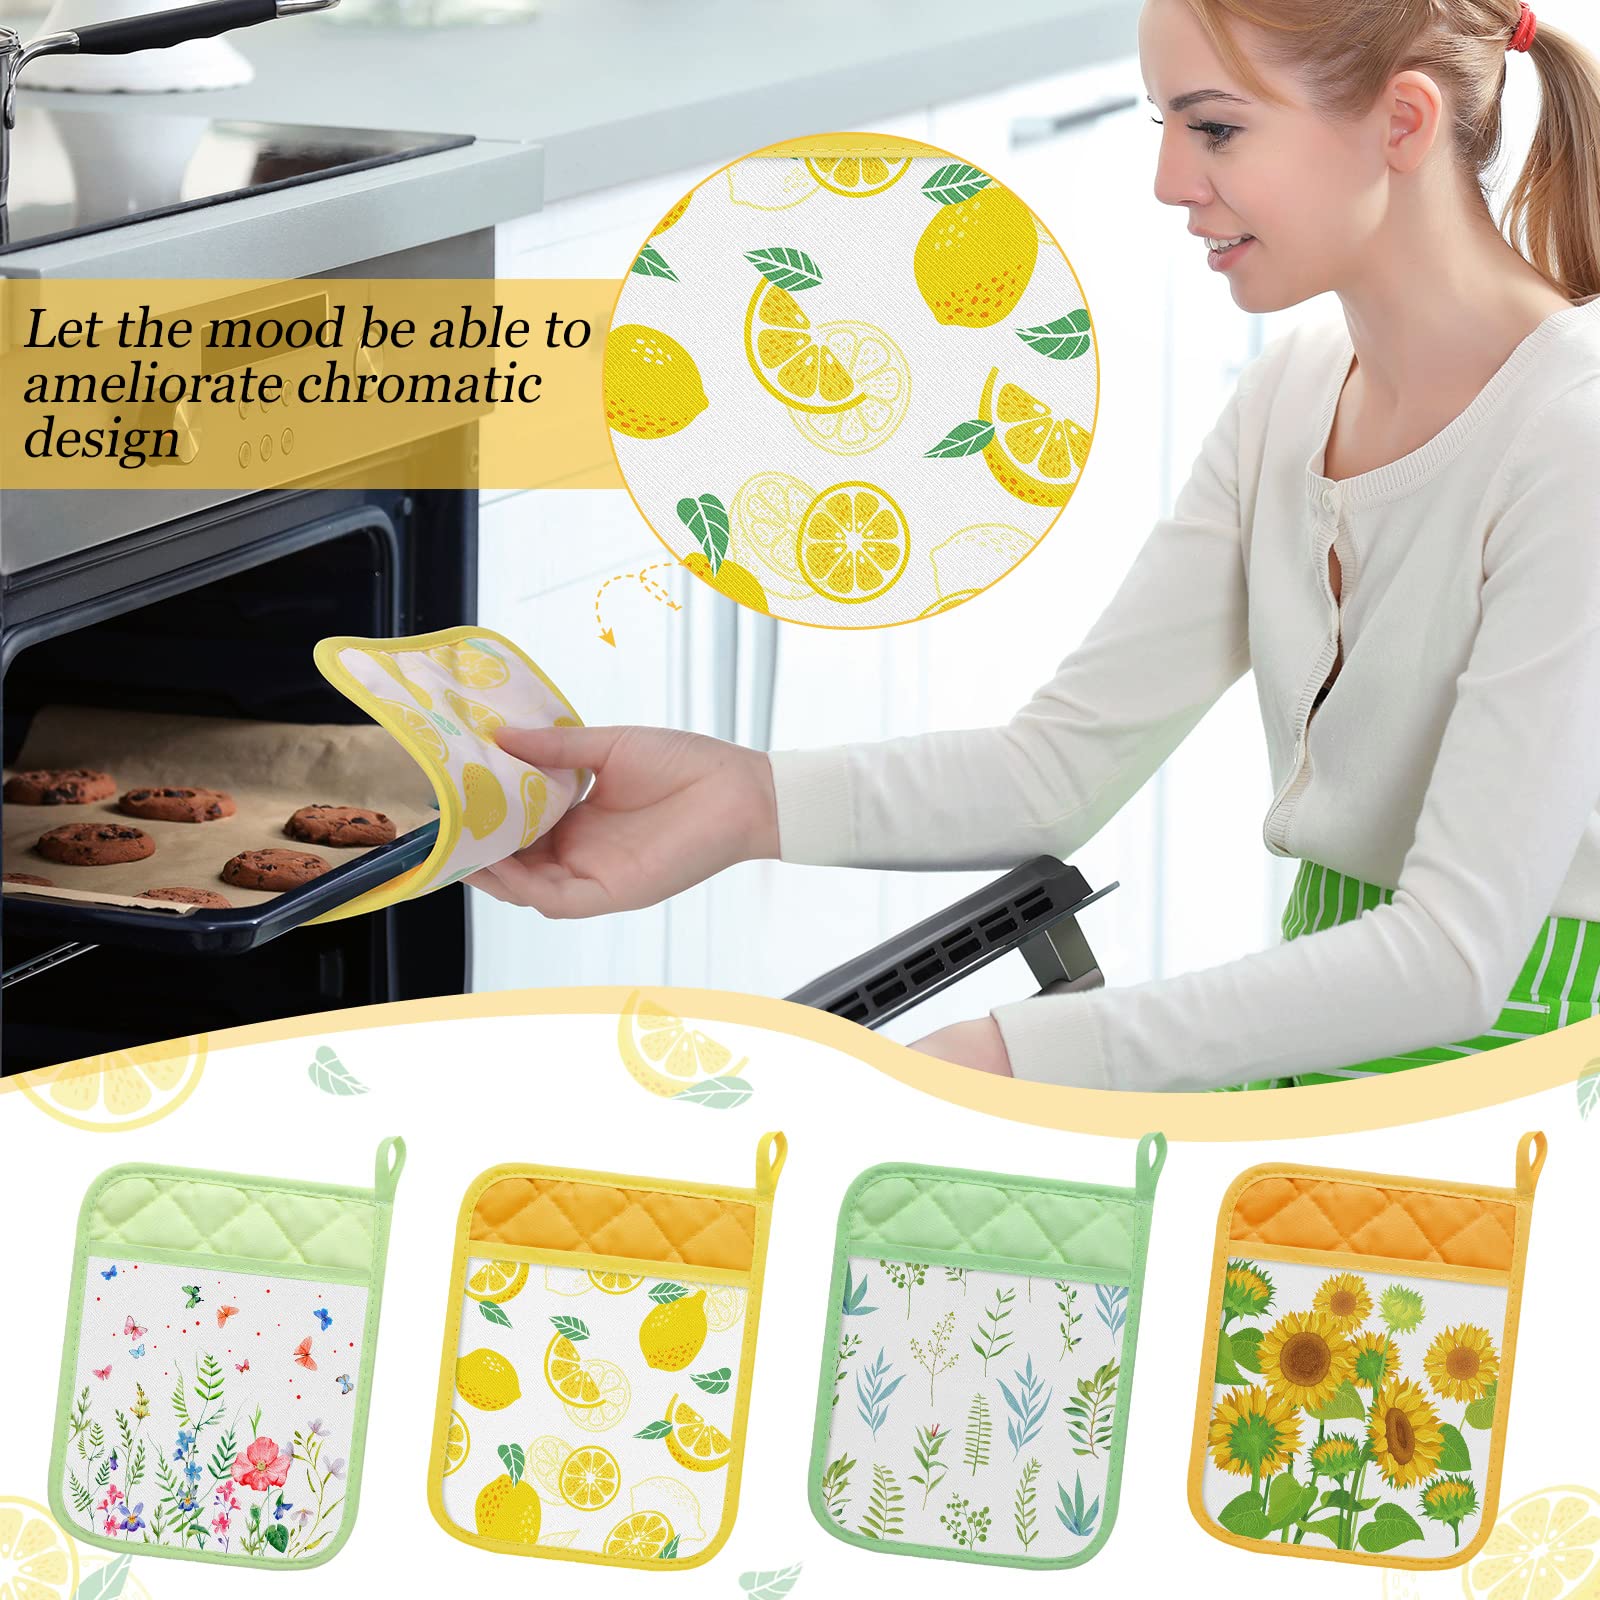 8 Pieces Pot Holders for Kitchen Heat Resistant Designer Pot Holders Hot Pads Pot Holders Lemon Flowers Pot Holders with Pockets and Loops Sunflower Pot Holders Oven Mitts for Baking Restaurant